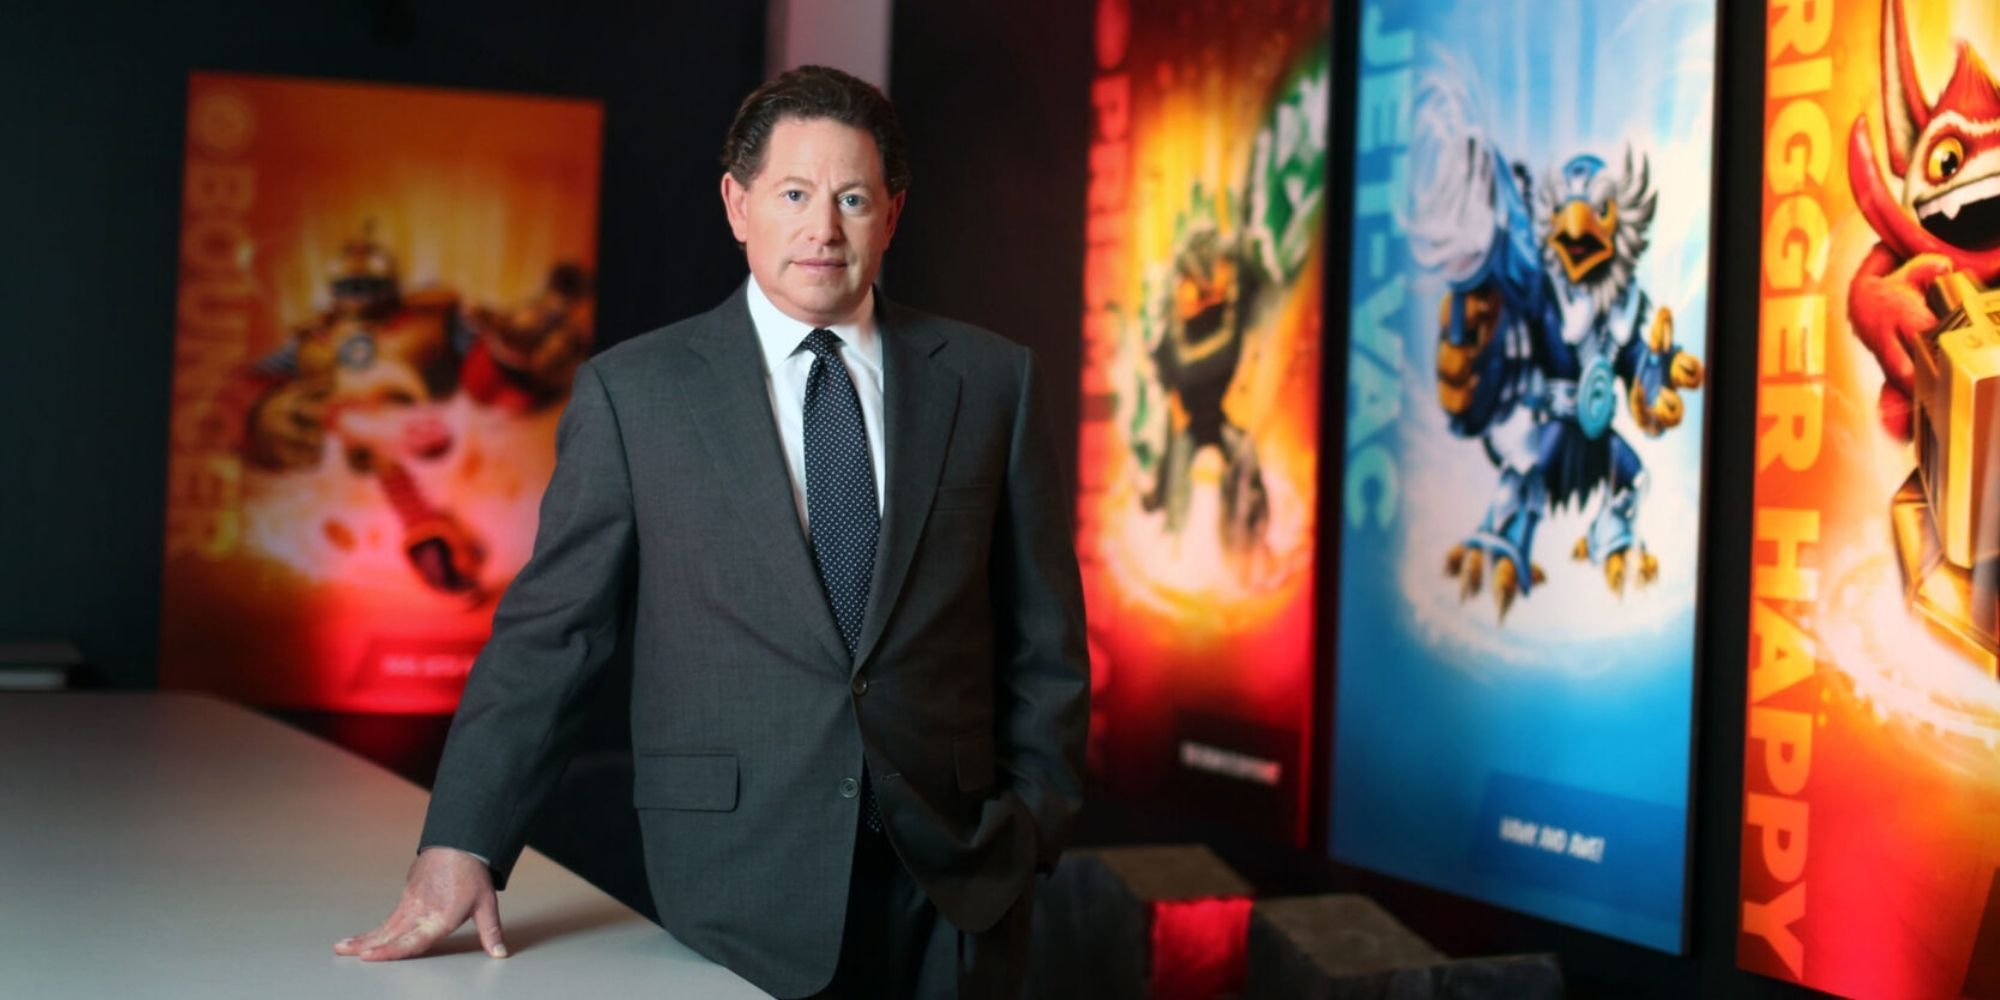 Bobby Kotick Says There Should Be More Mergers To Compete With Tencent